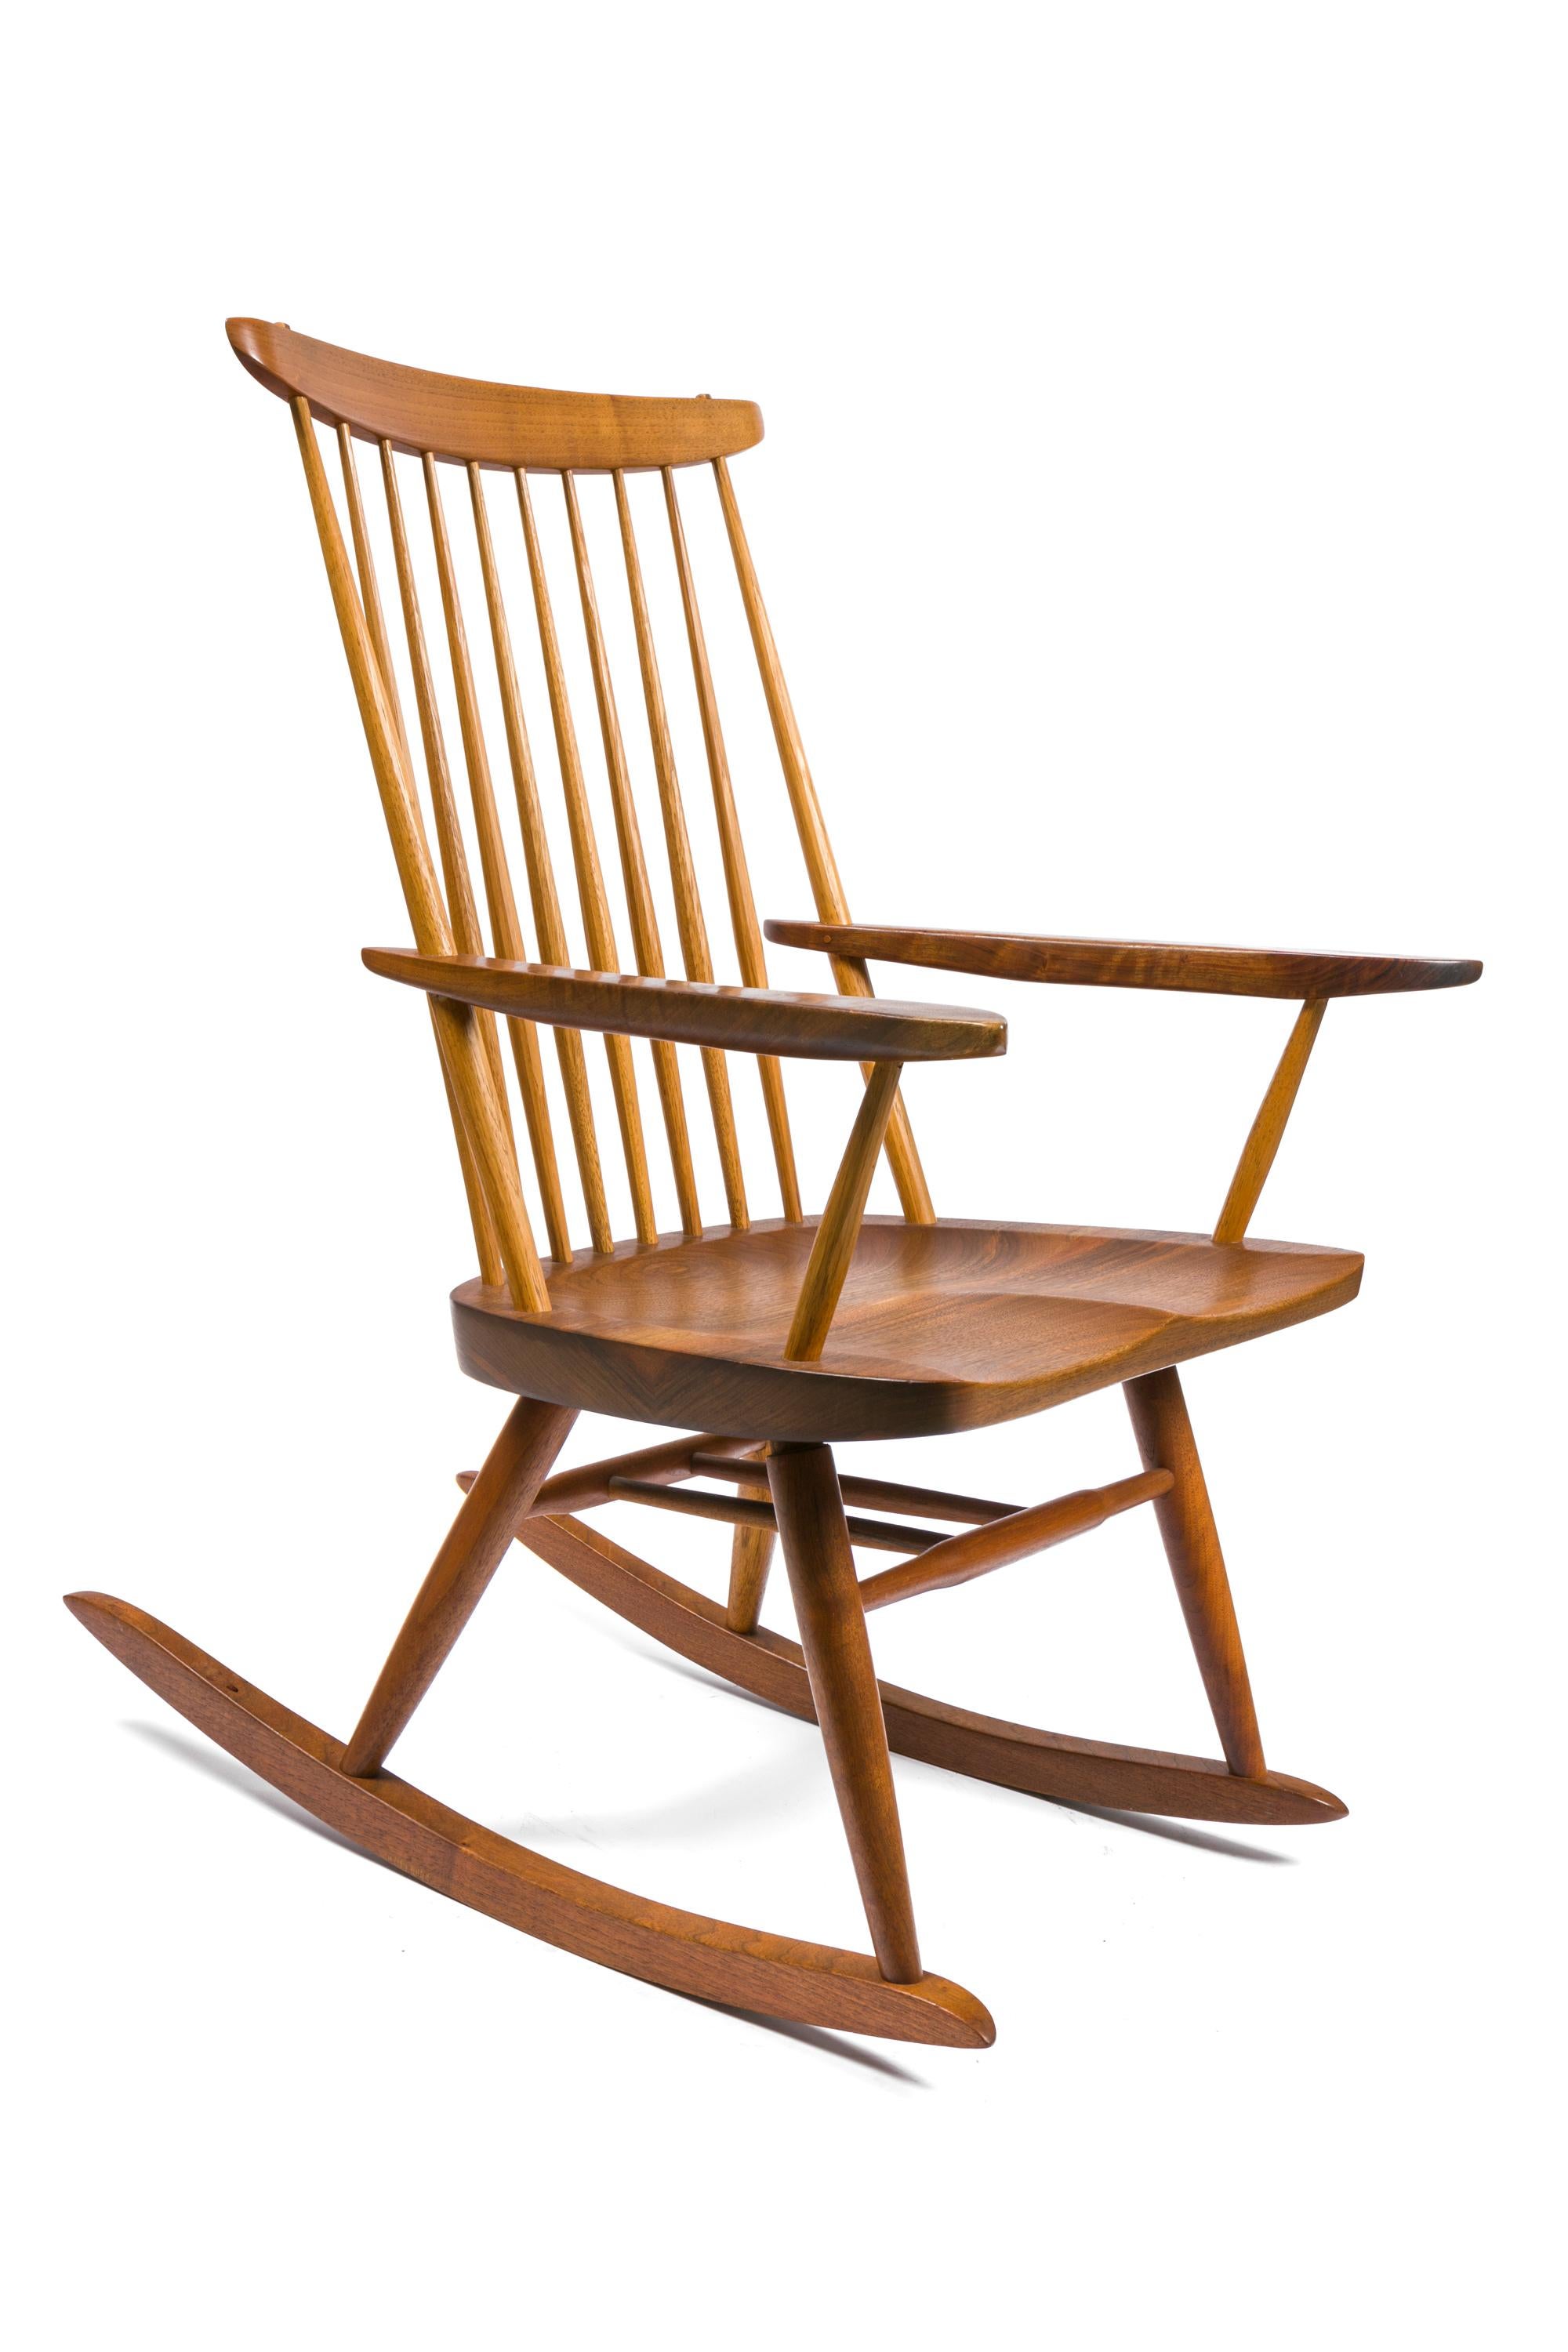 An fine example of one of George Nakashima's iconic designs. It's elegant simplicity has made this rocker one of his most enduring designs.